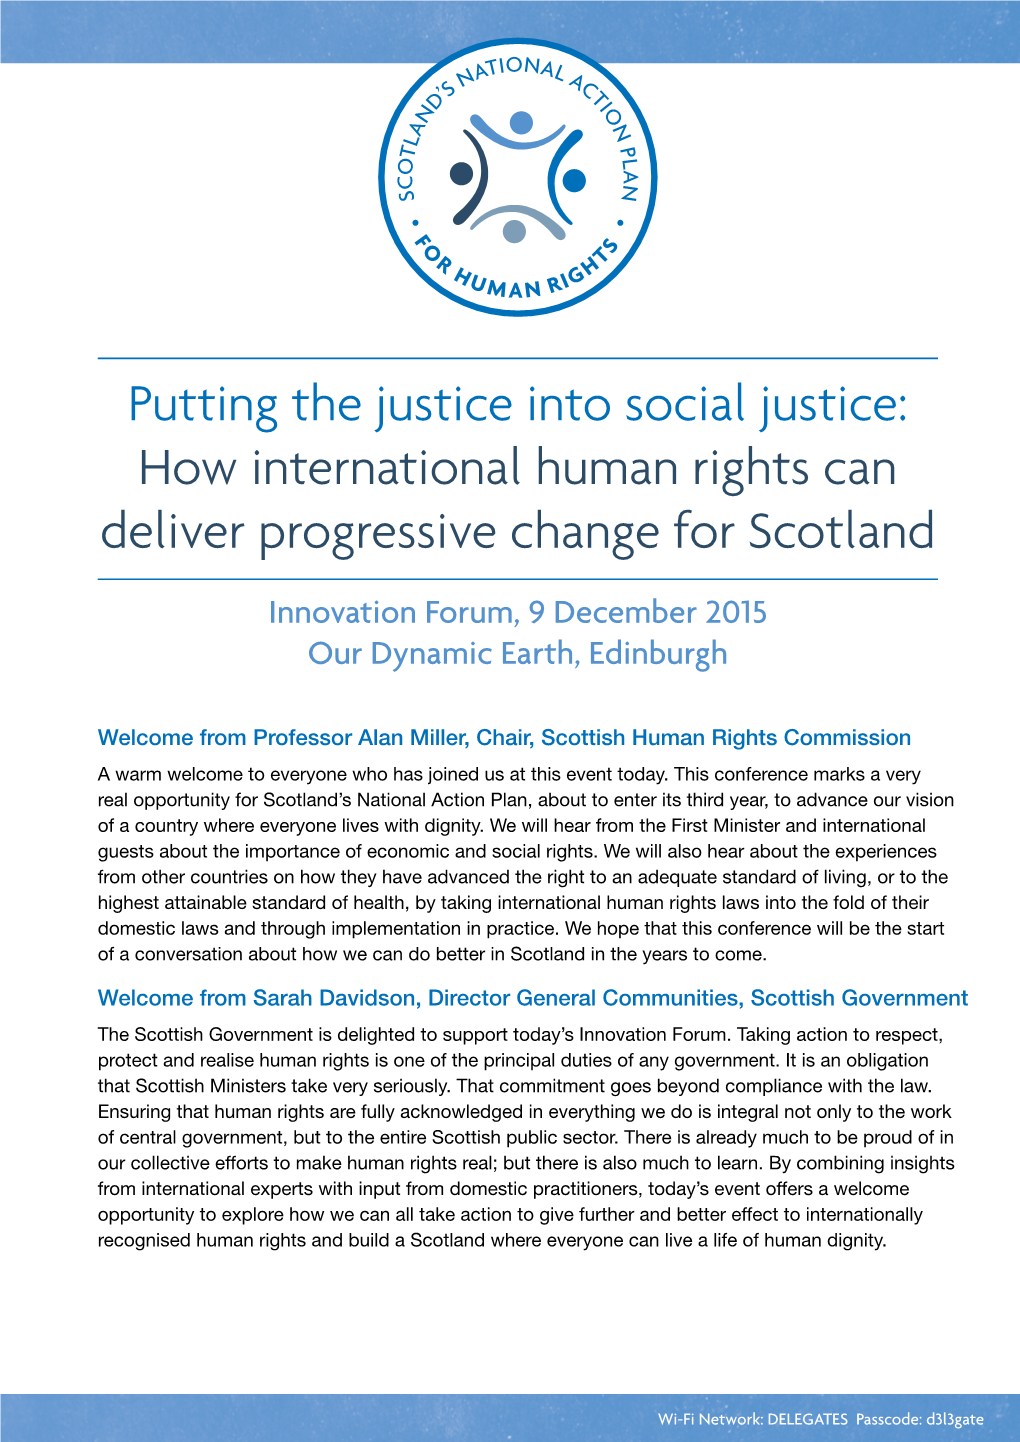 Putting the Justice Into Social Justice: How International Human Rights Can Deliver Progressive Change for Scotland